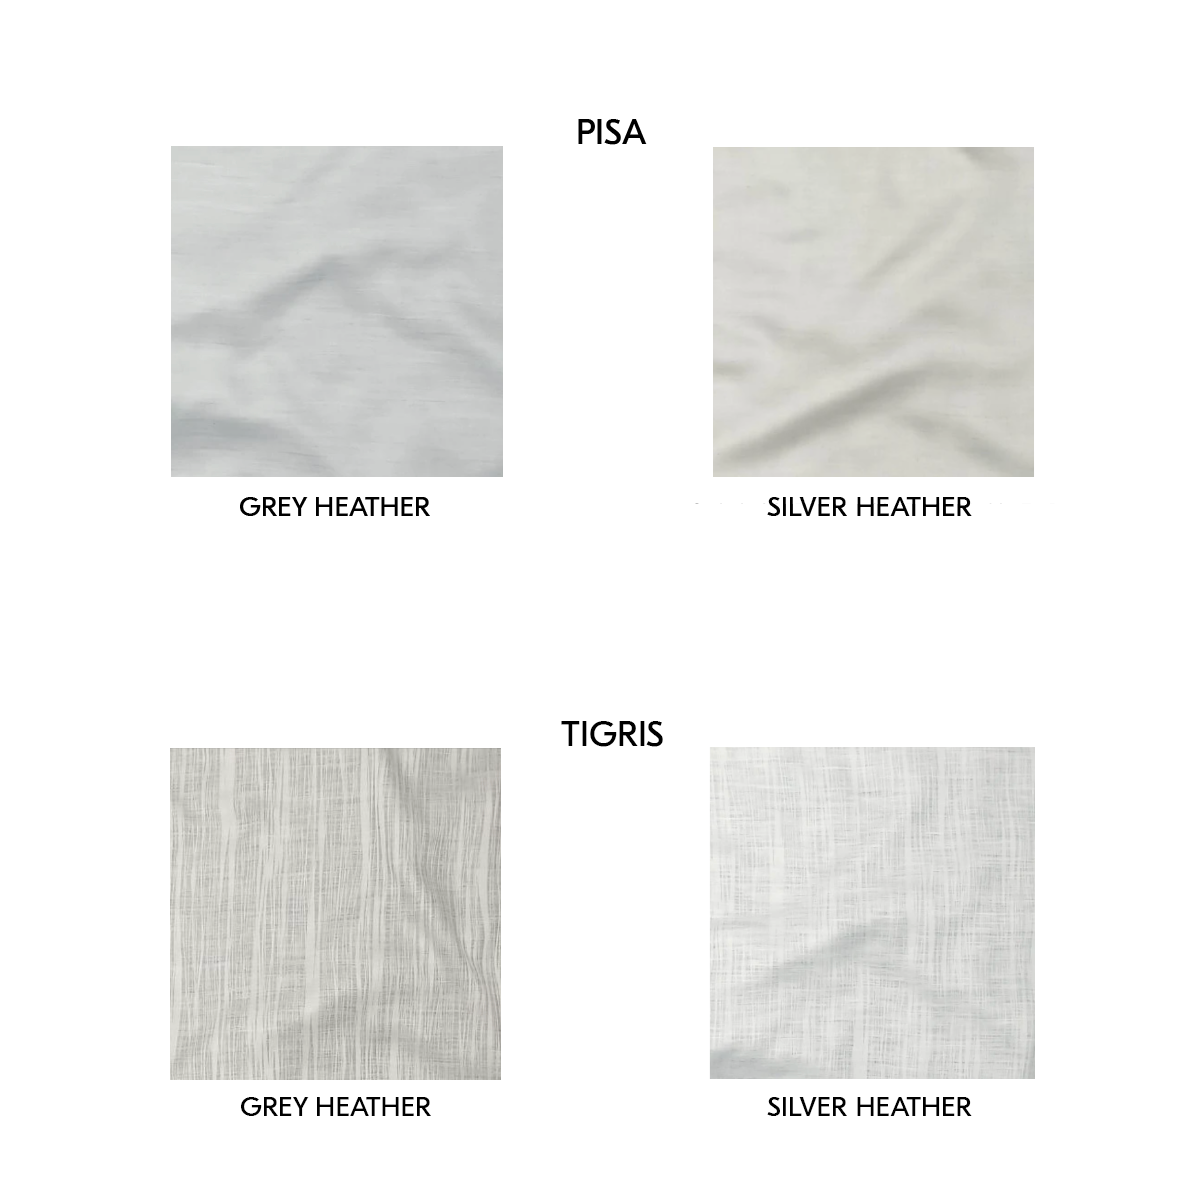 Made in Italy with 100% wood fibre from responsibly managed forests, the Tigris Pisa collection combines the soft, silky feel of sateen with the easy care of cotton.